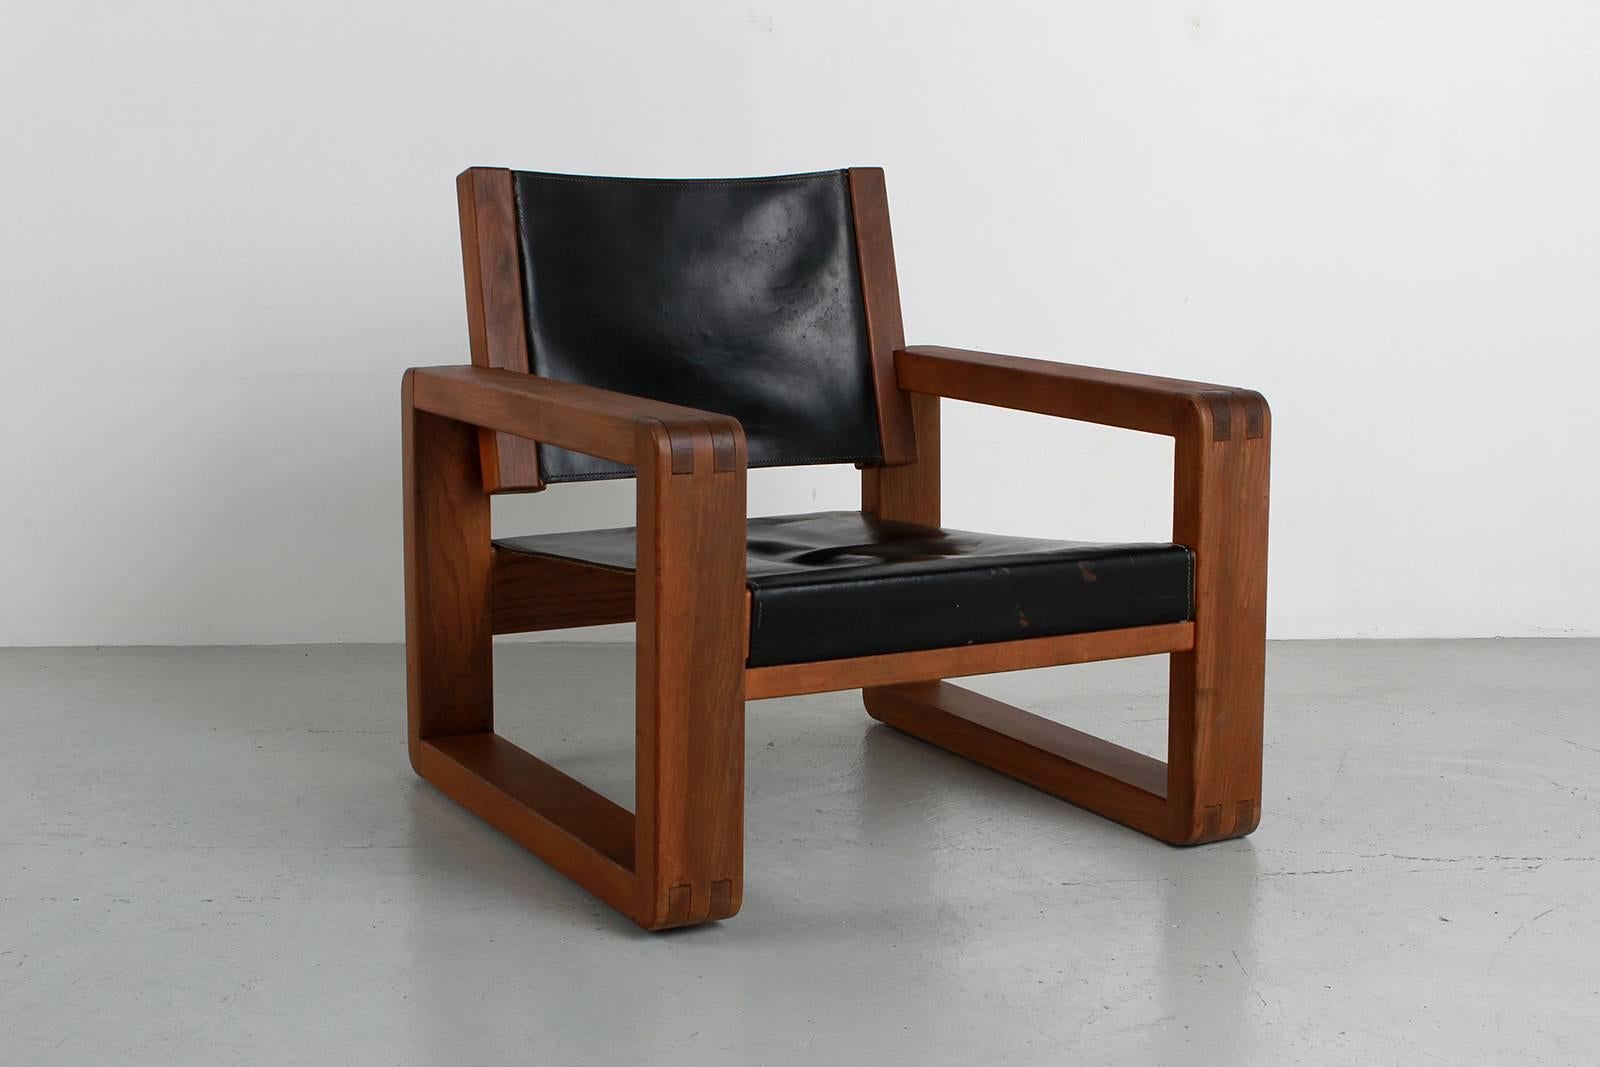 Armchair designed in the style of French designer Pierre Chapo for Atelier Chapo, Paris. Cubic design of solid elmwood with black leather seat. Beautiful wood joint detail and fantastic patina to leather with contrast stitching. Great scale.